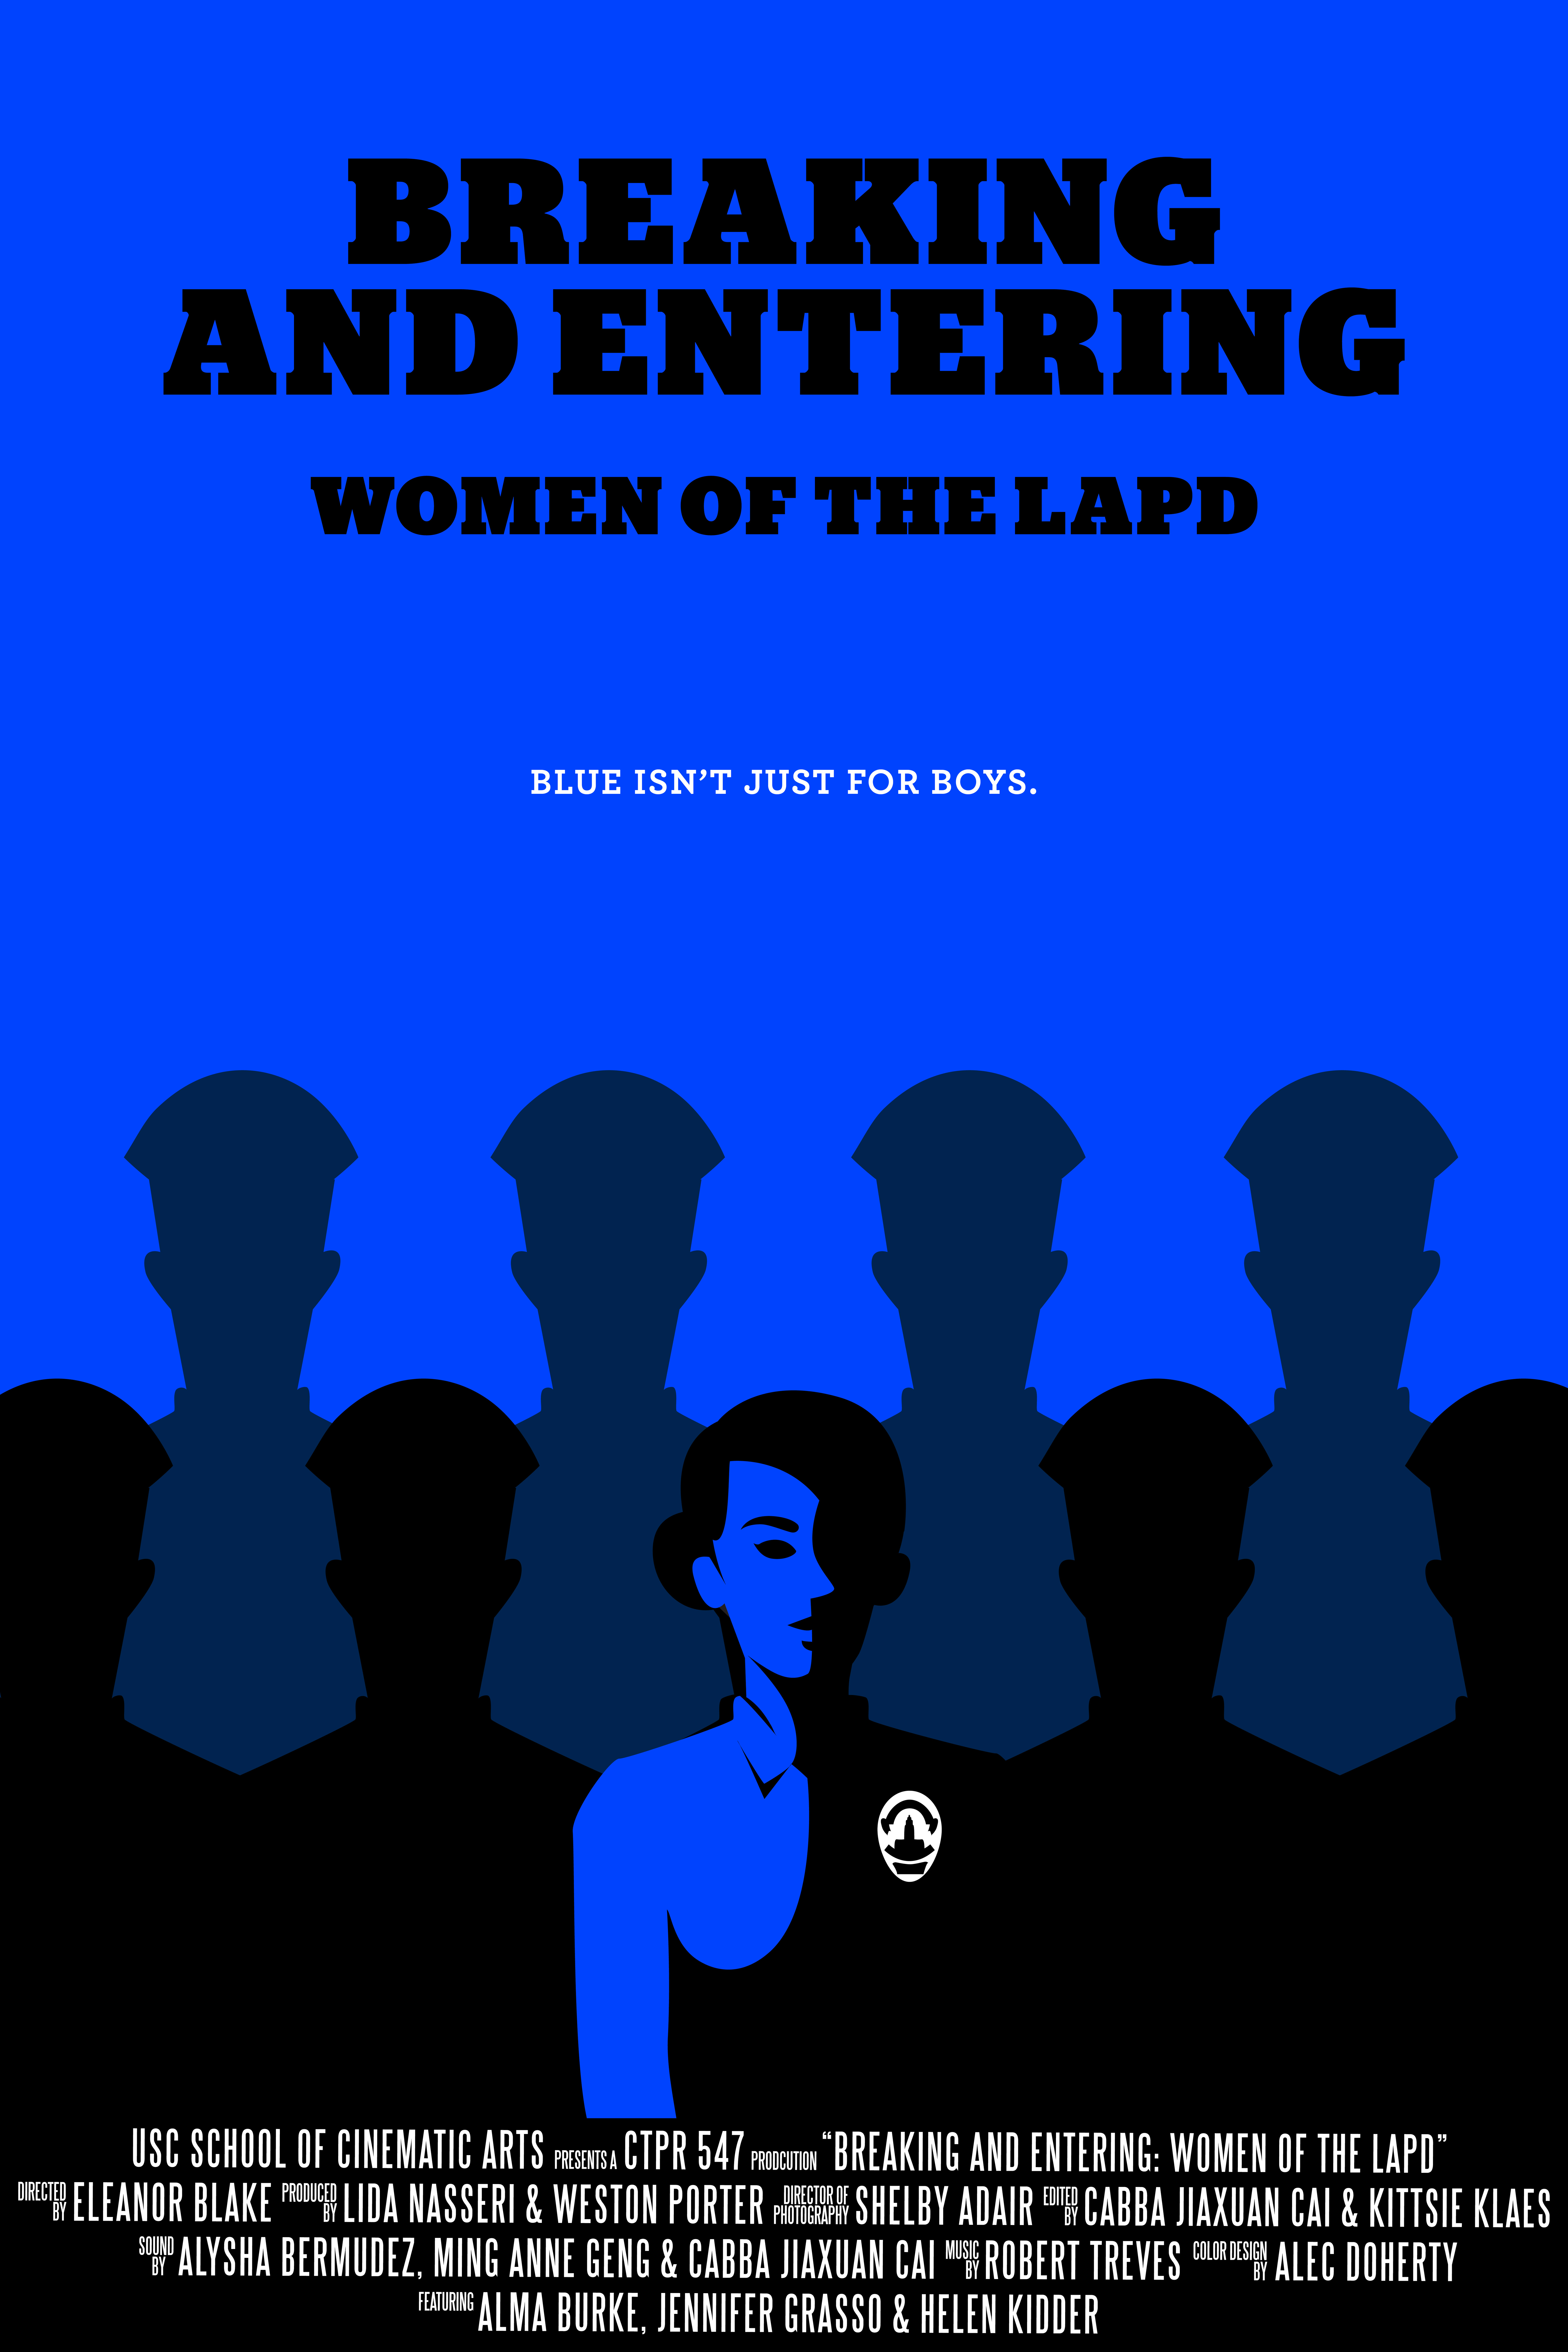 Breaking and Entering: Women of the LAPD